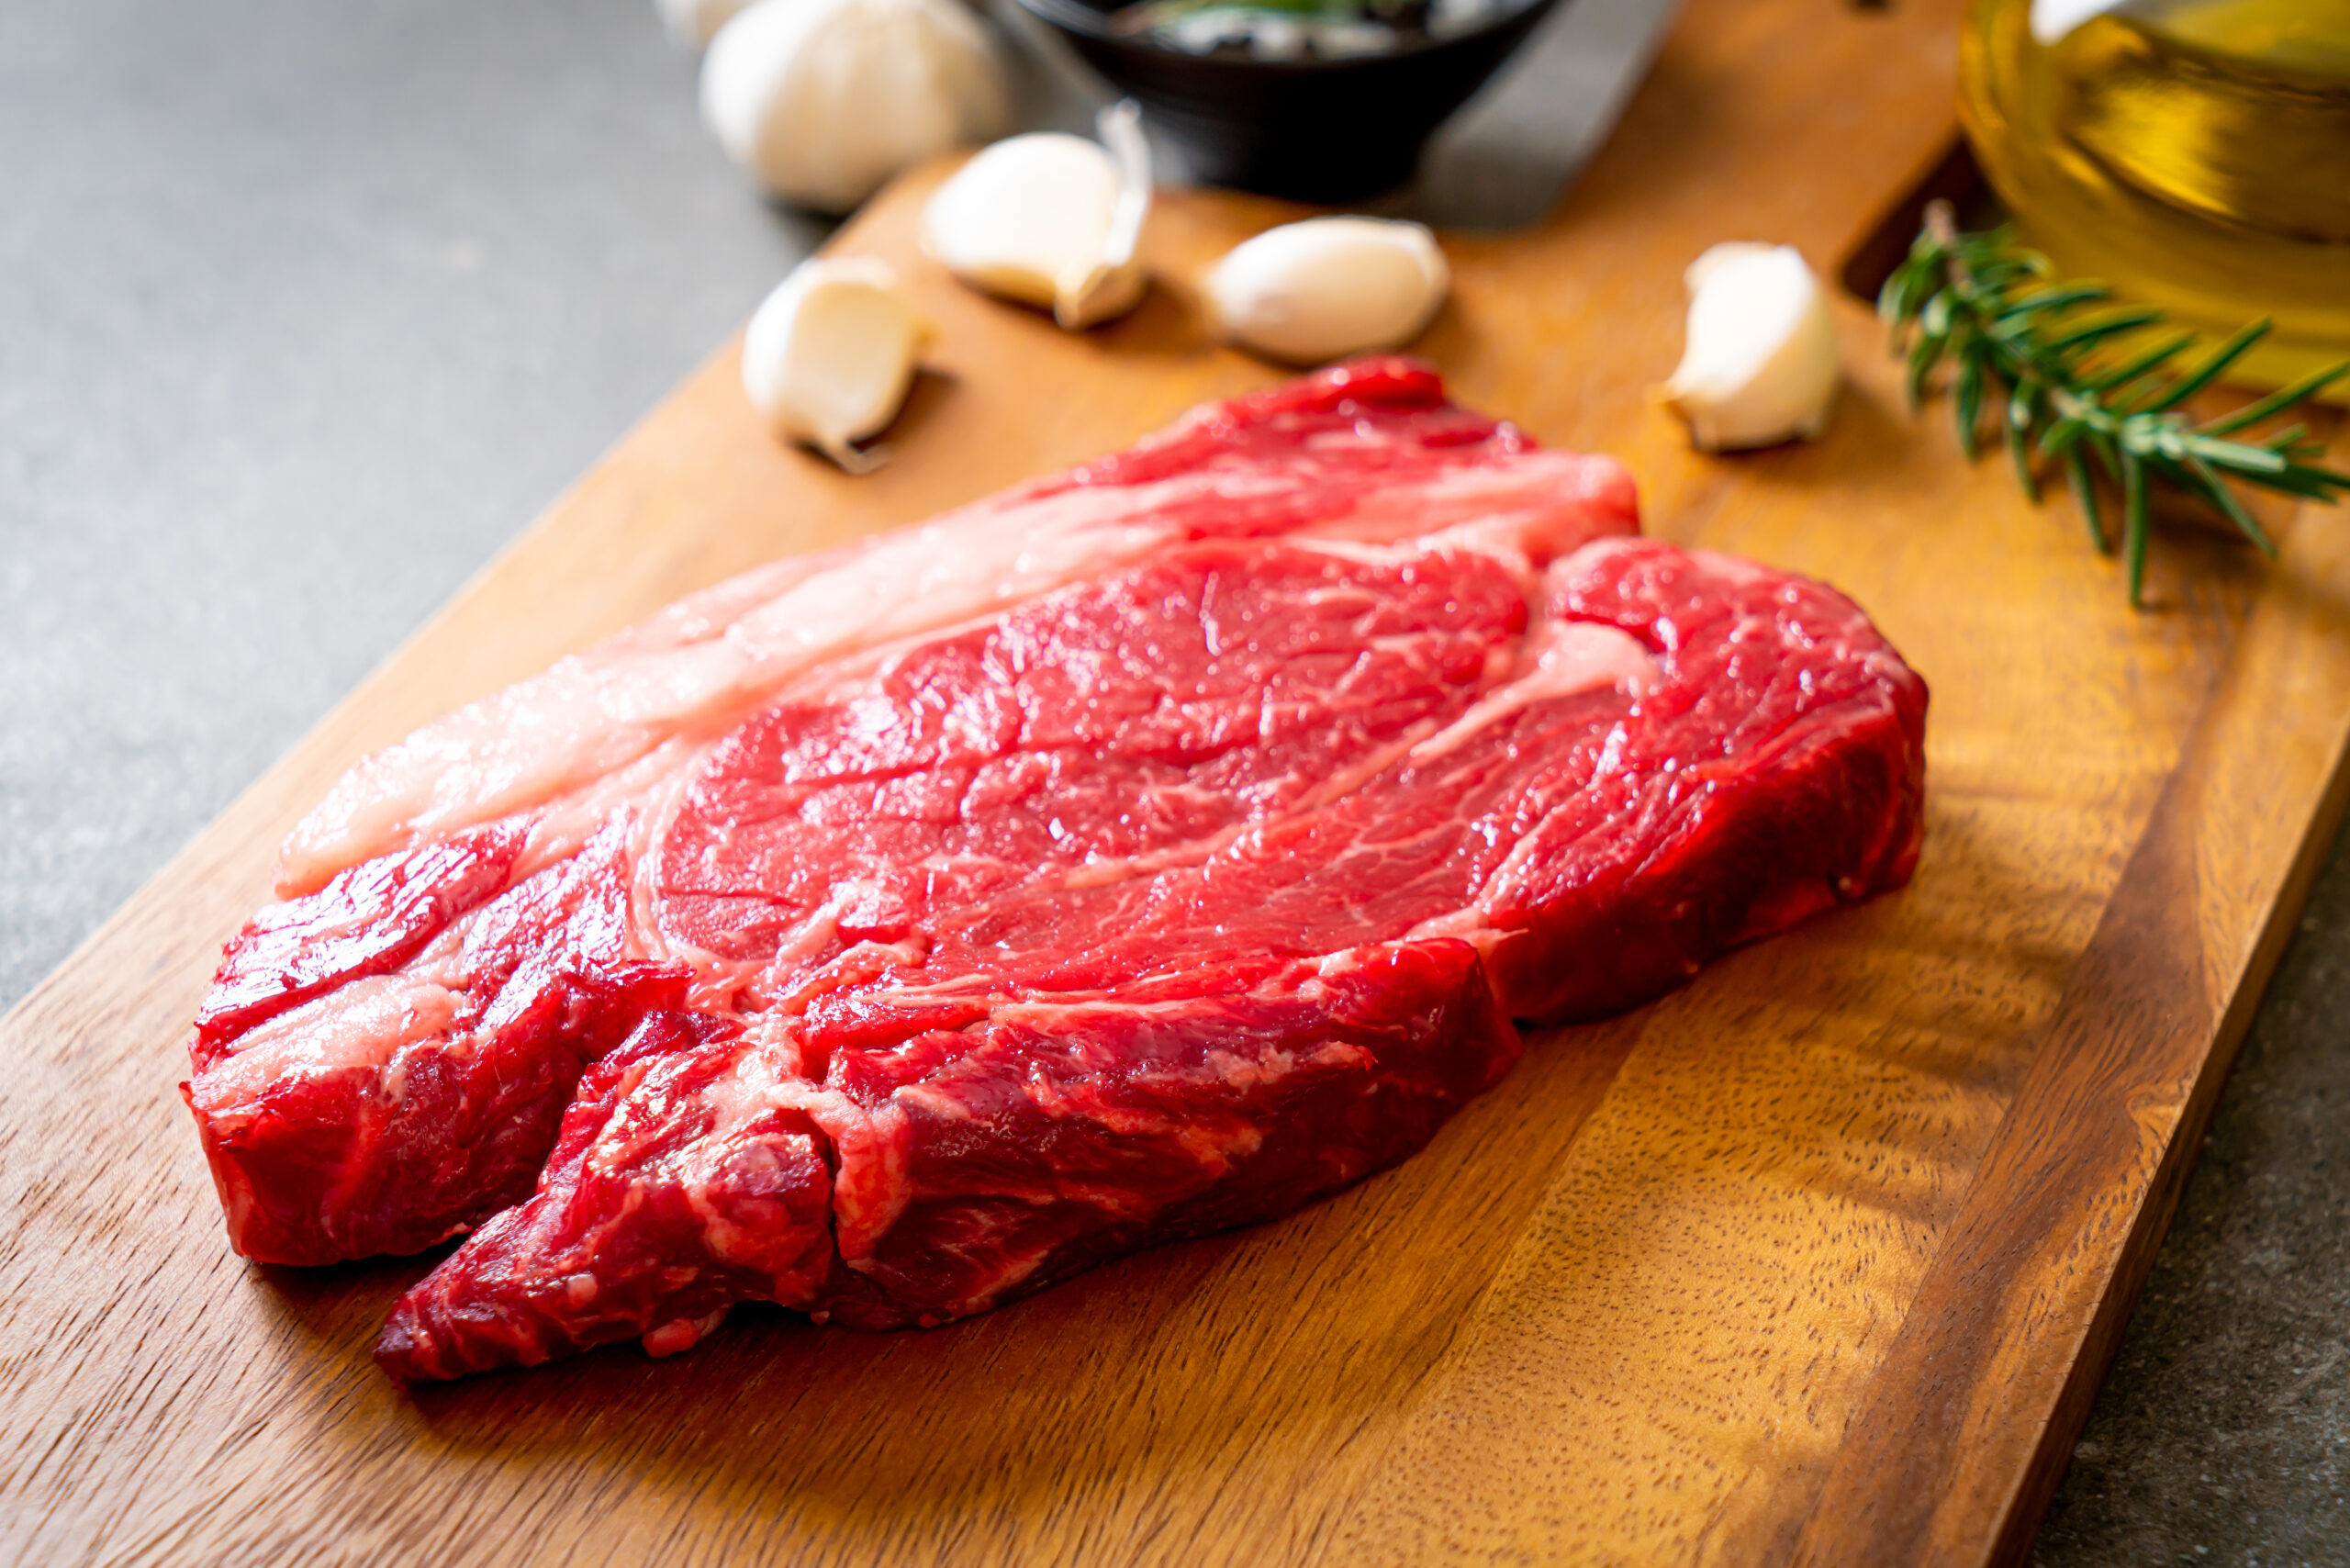 fresh raw beef steak or raw meat, Image courtesy of Vecteezy